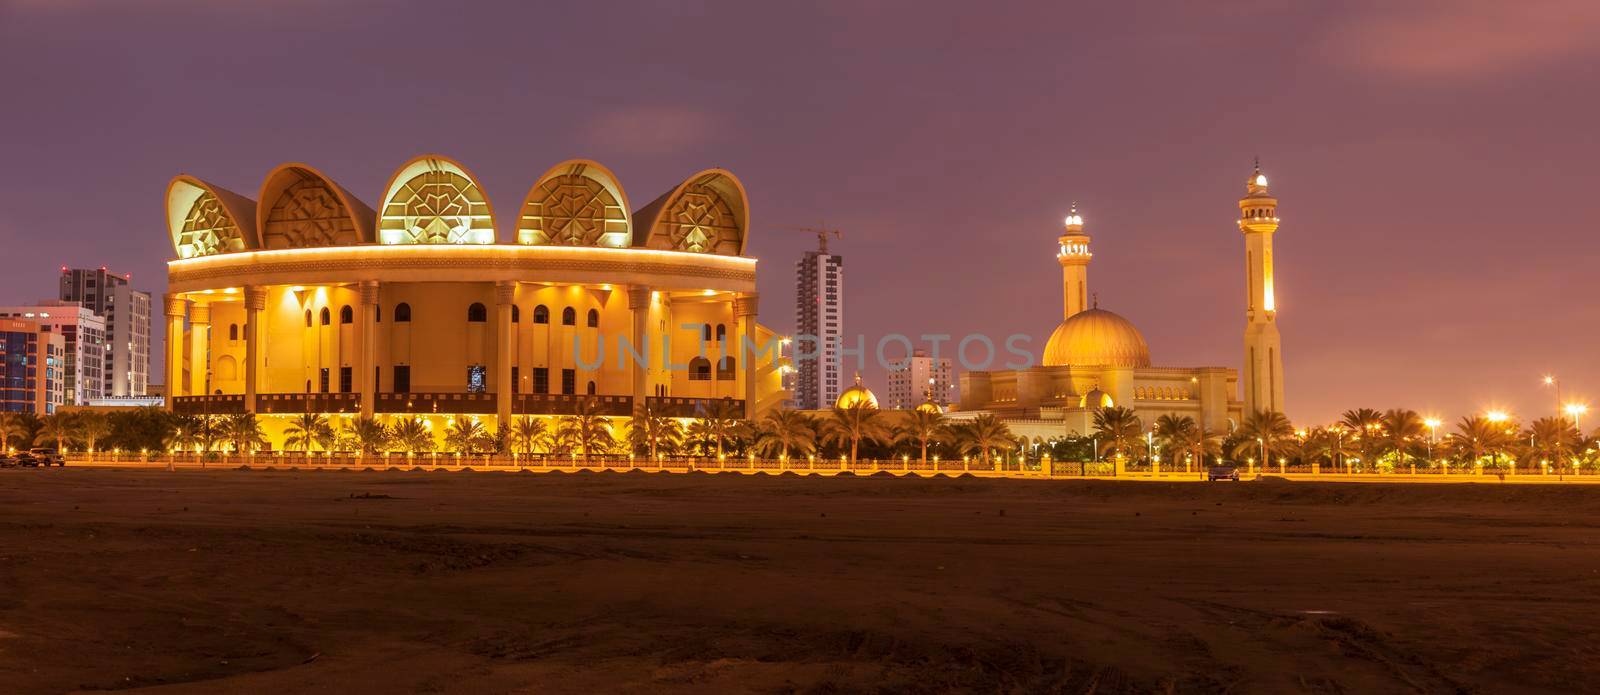 Bahrain National Library and Al Fateh Grand Mosque by benkrut